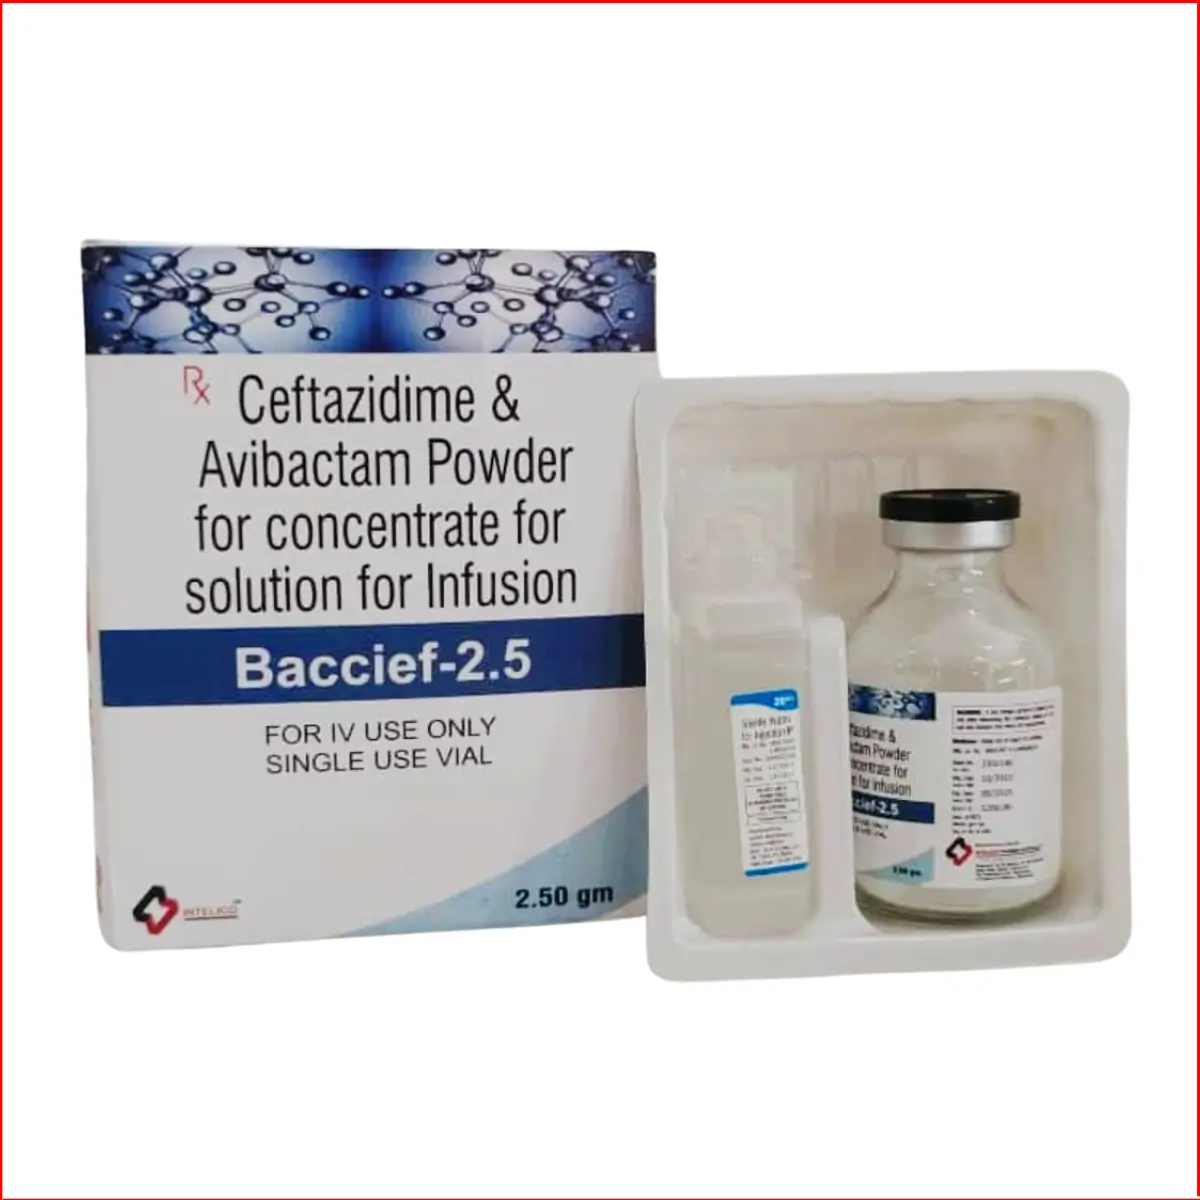 Ceftazidime & Avibactam Powder for concentrate solution for infusion